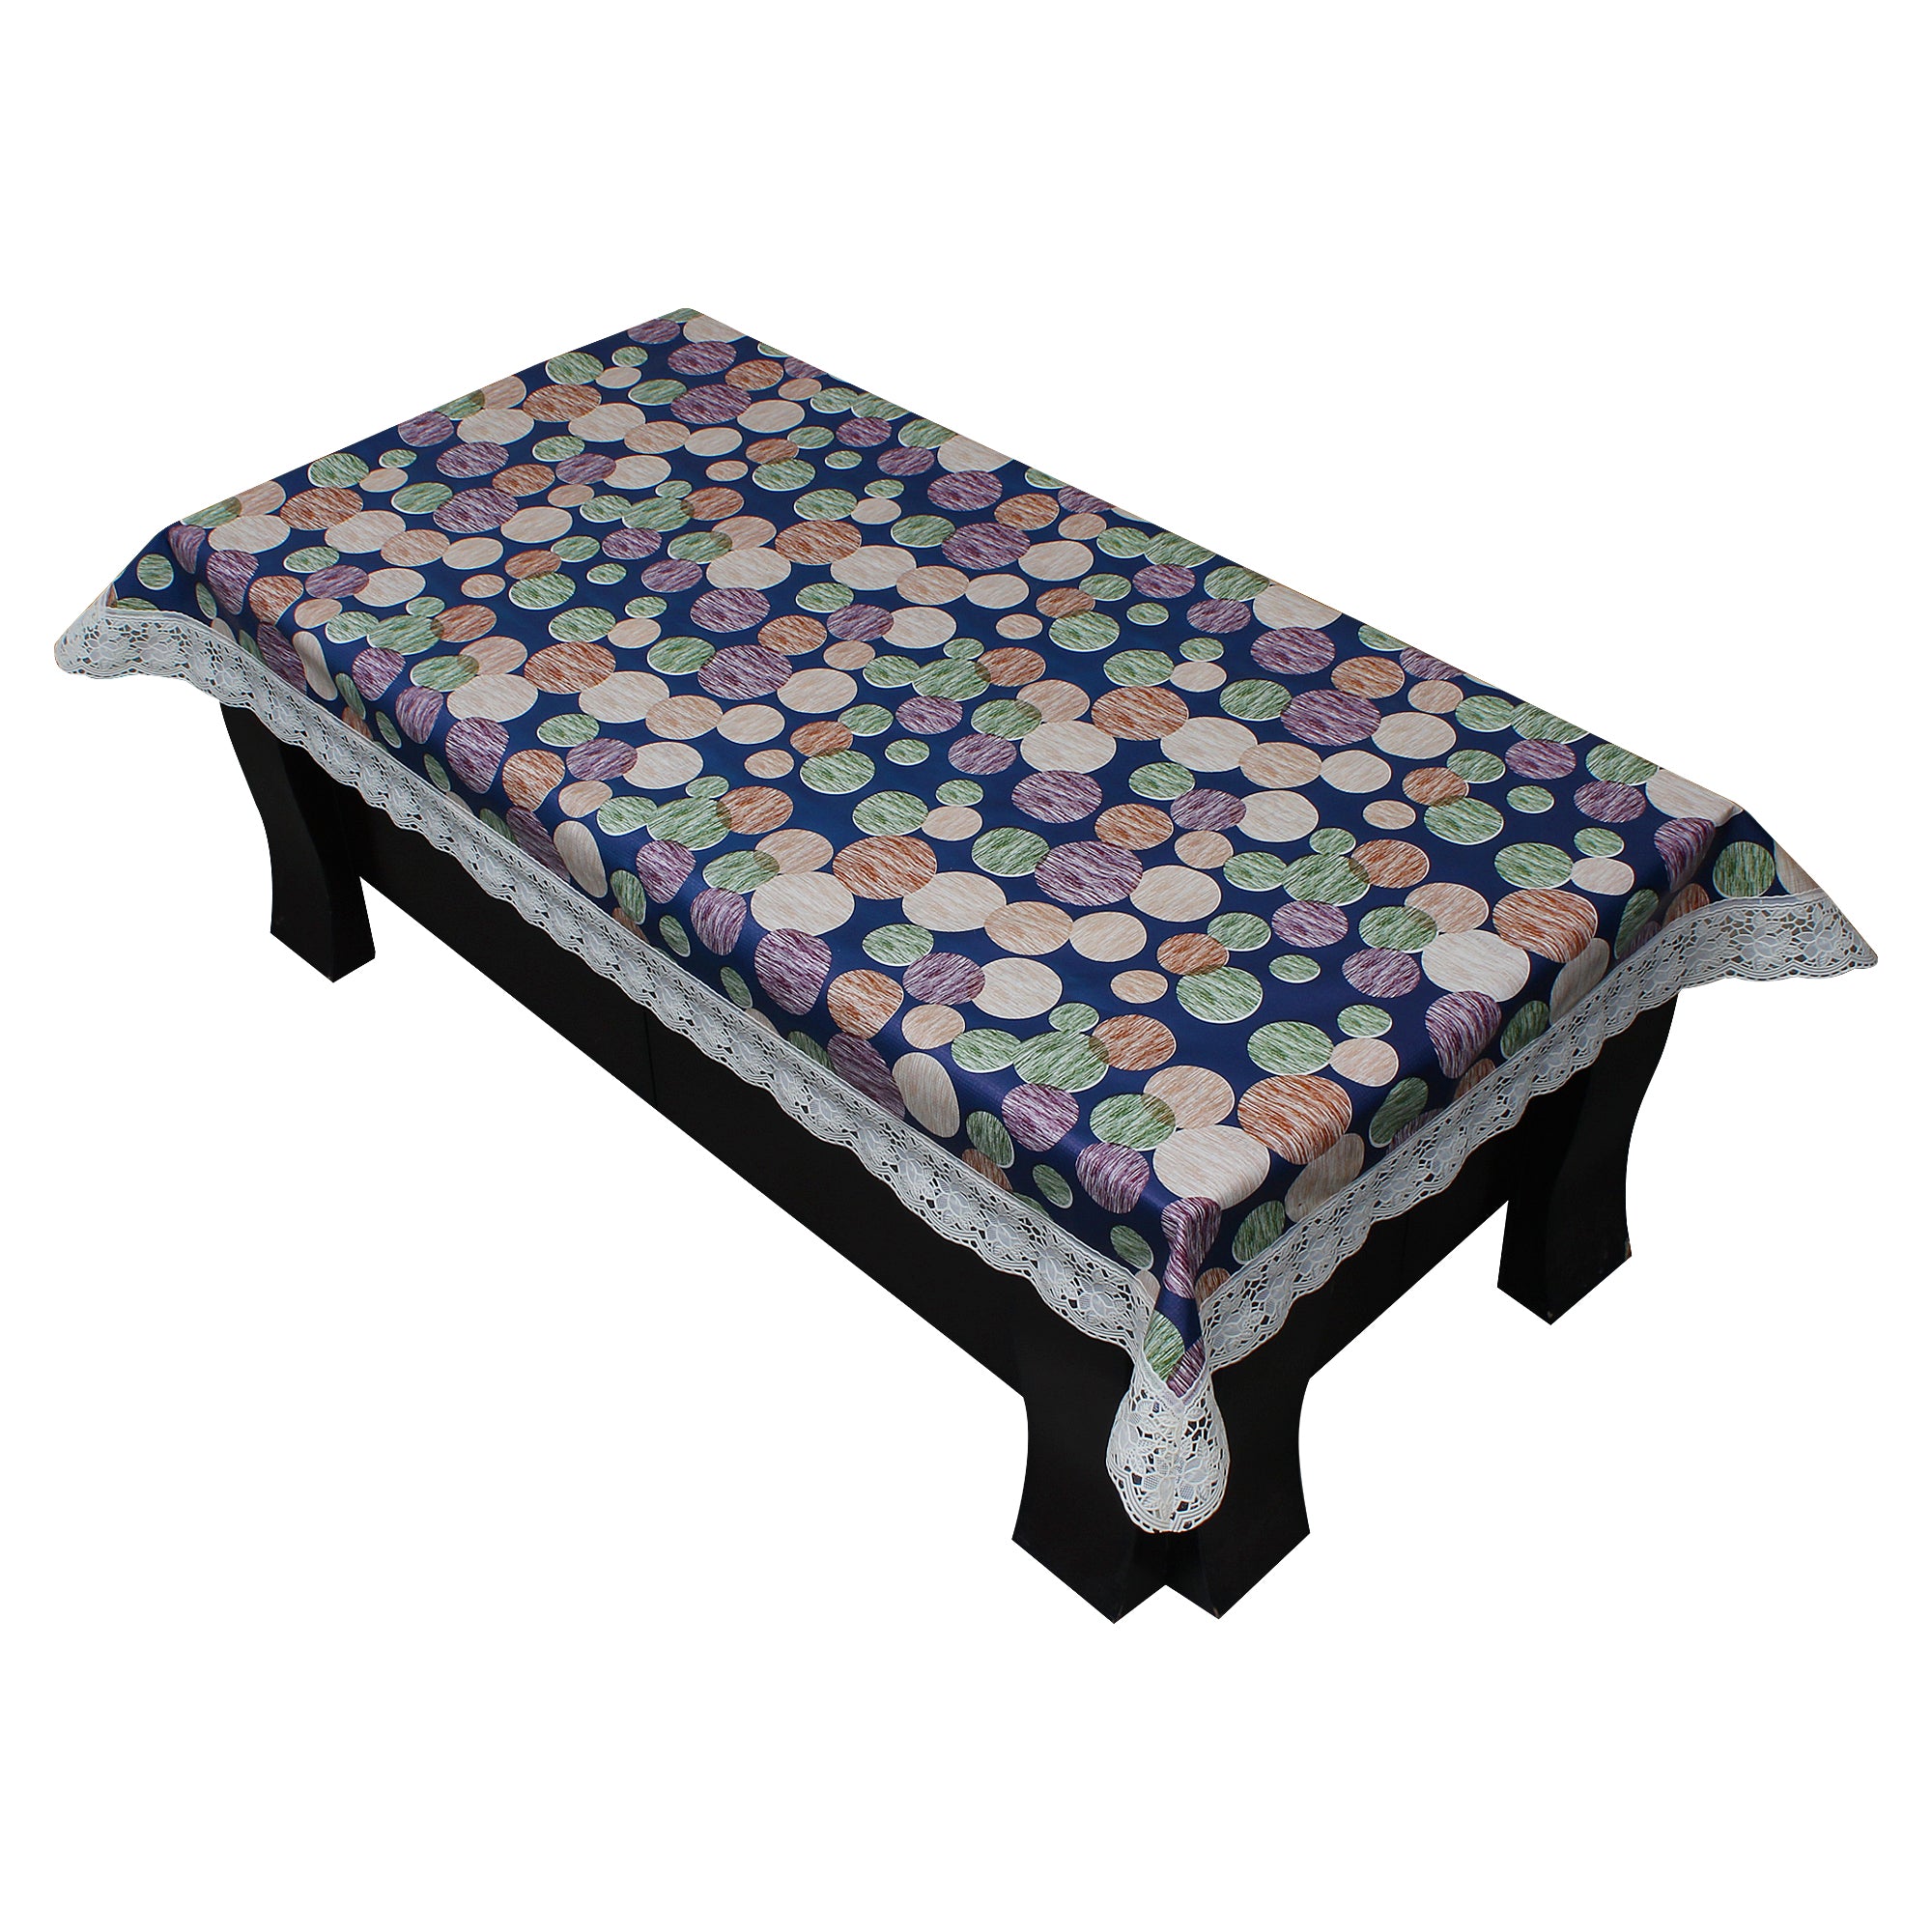 Waterproof and Dustproof Center Table Cover, SA71 - (40X60 Inch) - Dream Care Furnishings Private Limited